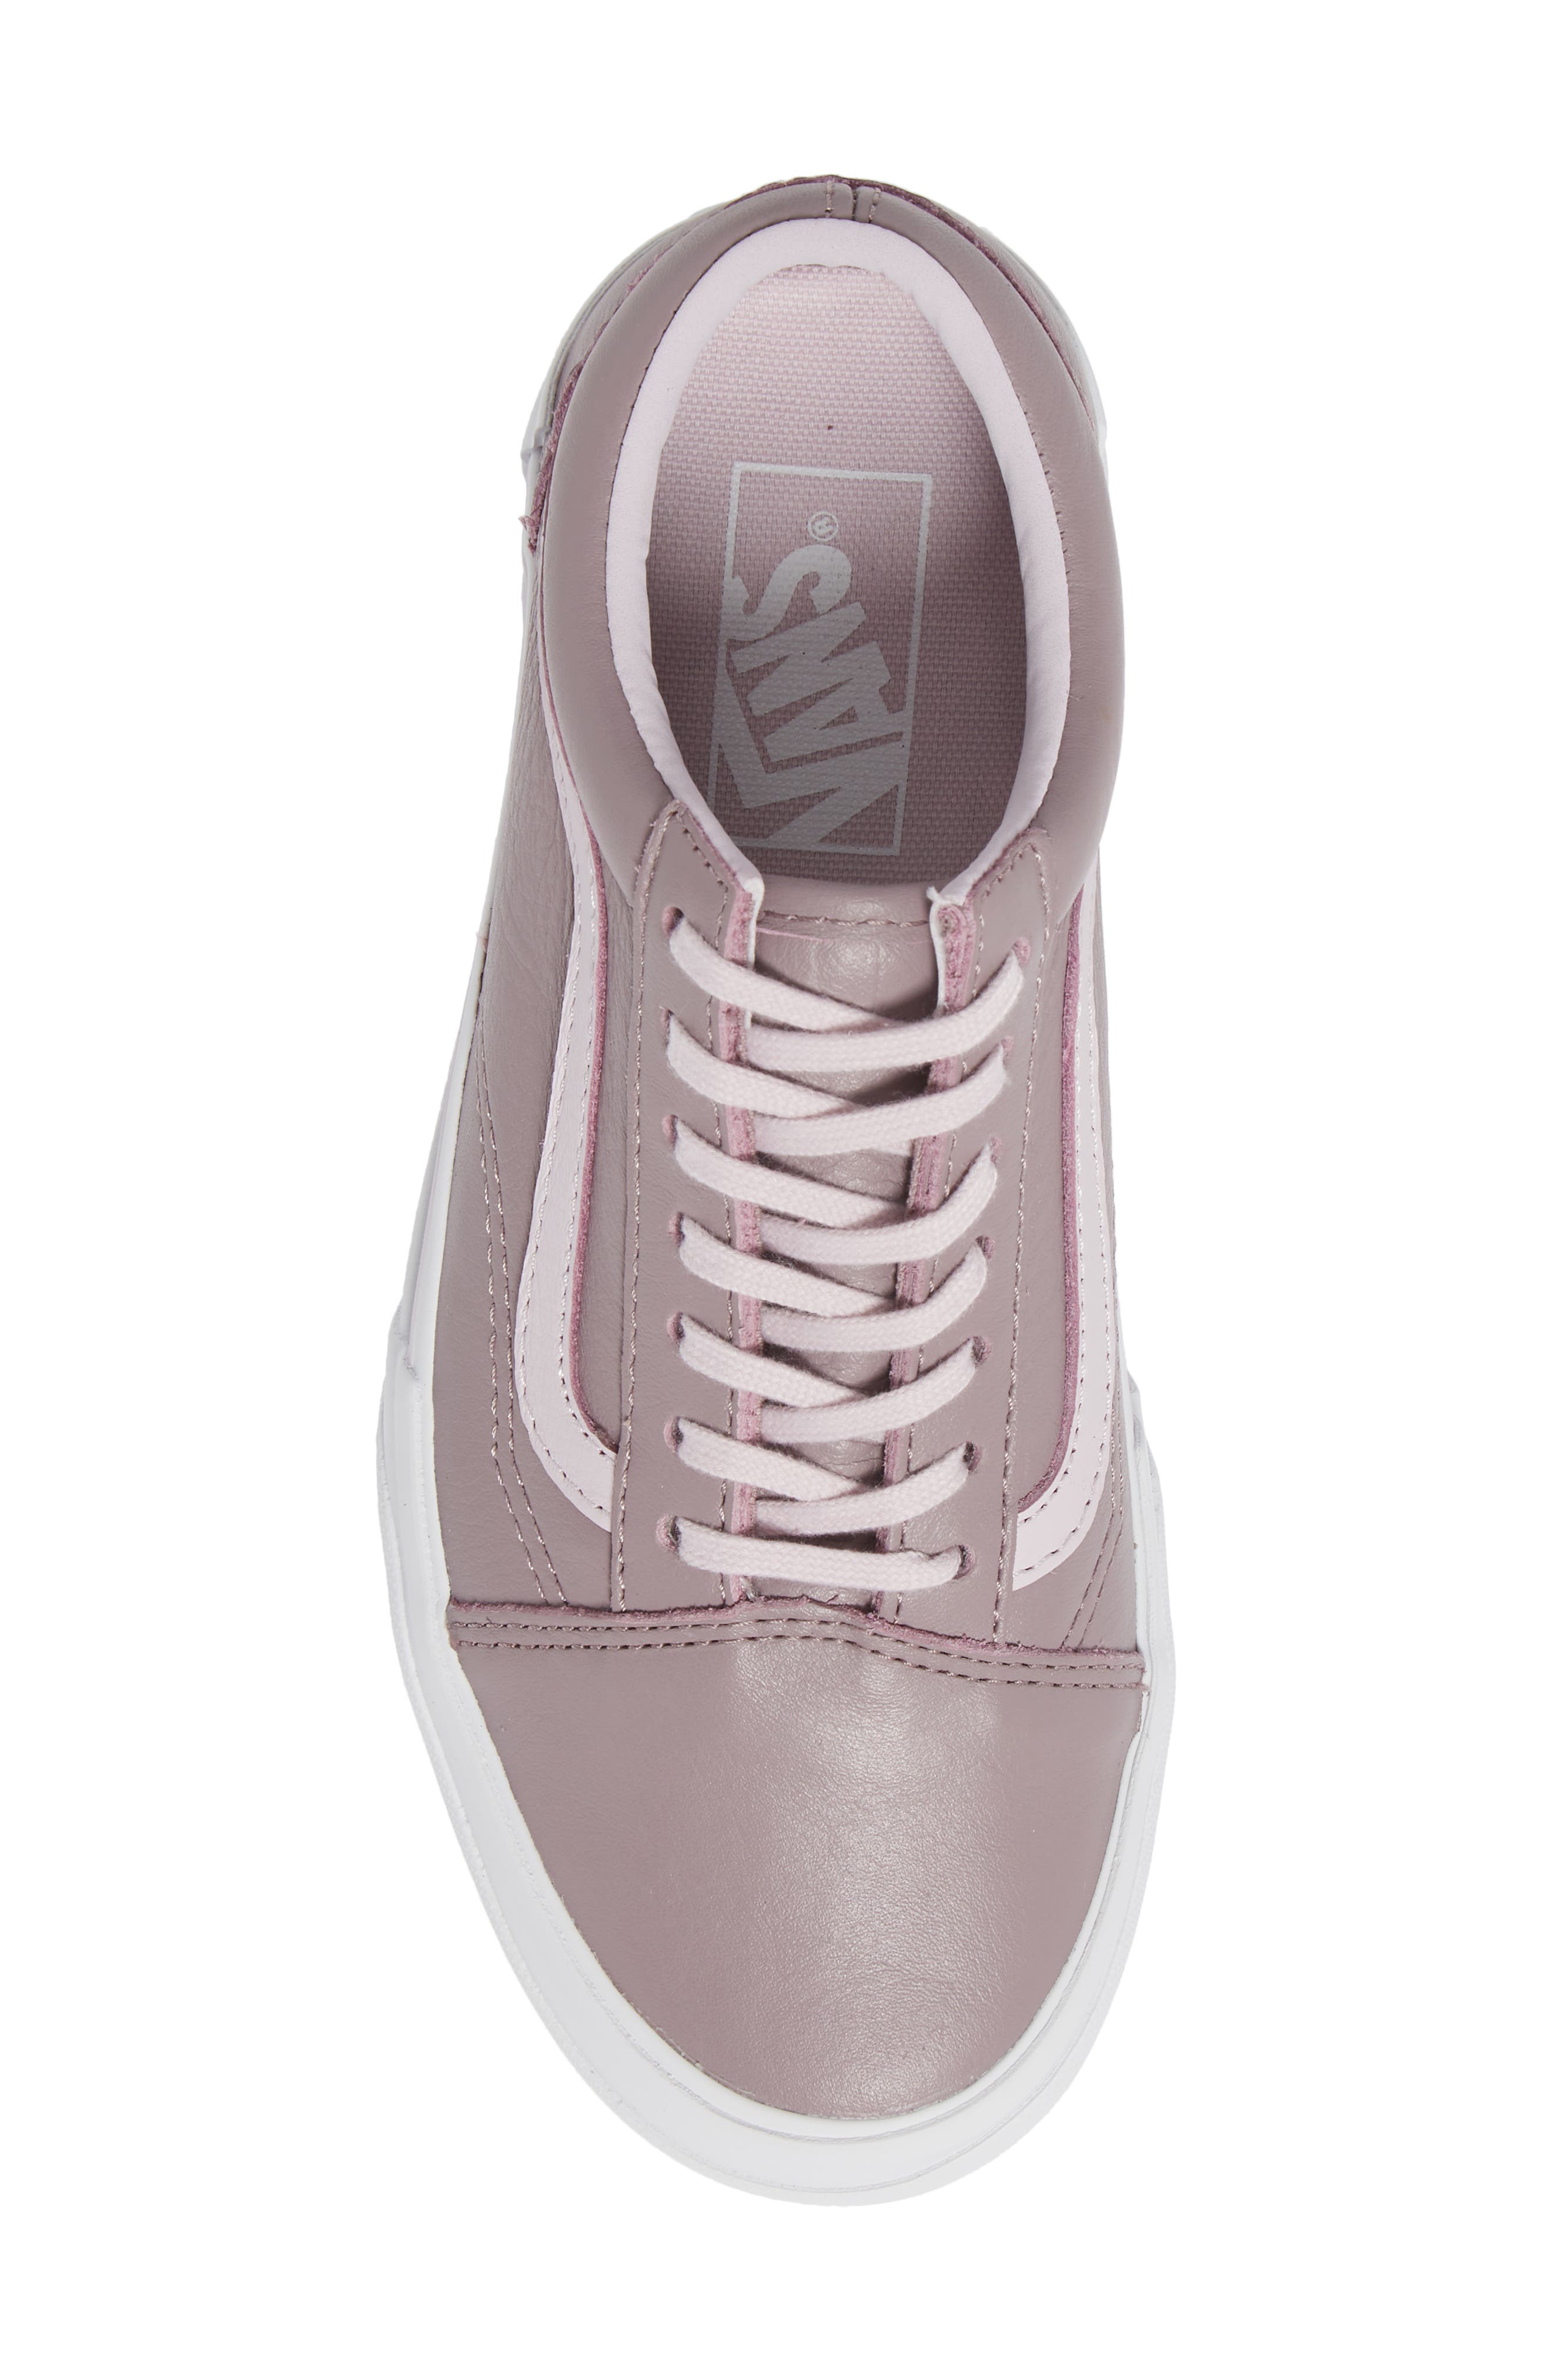 Vans Tumbled Leather Old Skool Stacked (Purple Dove/True White) 6